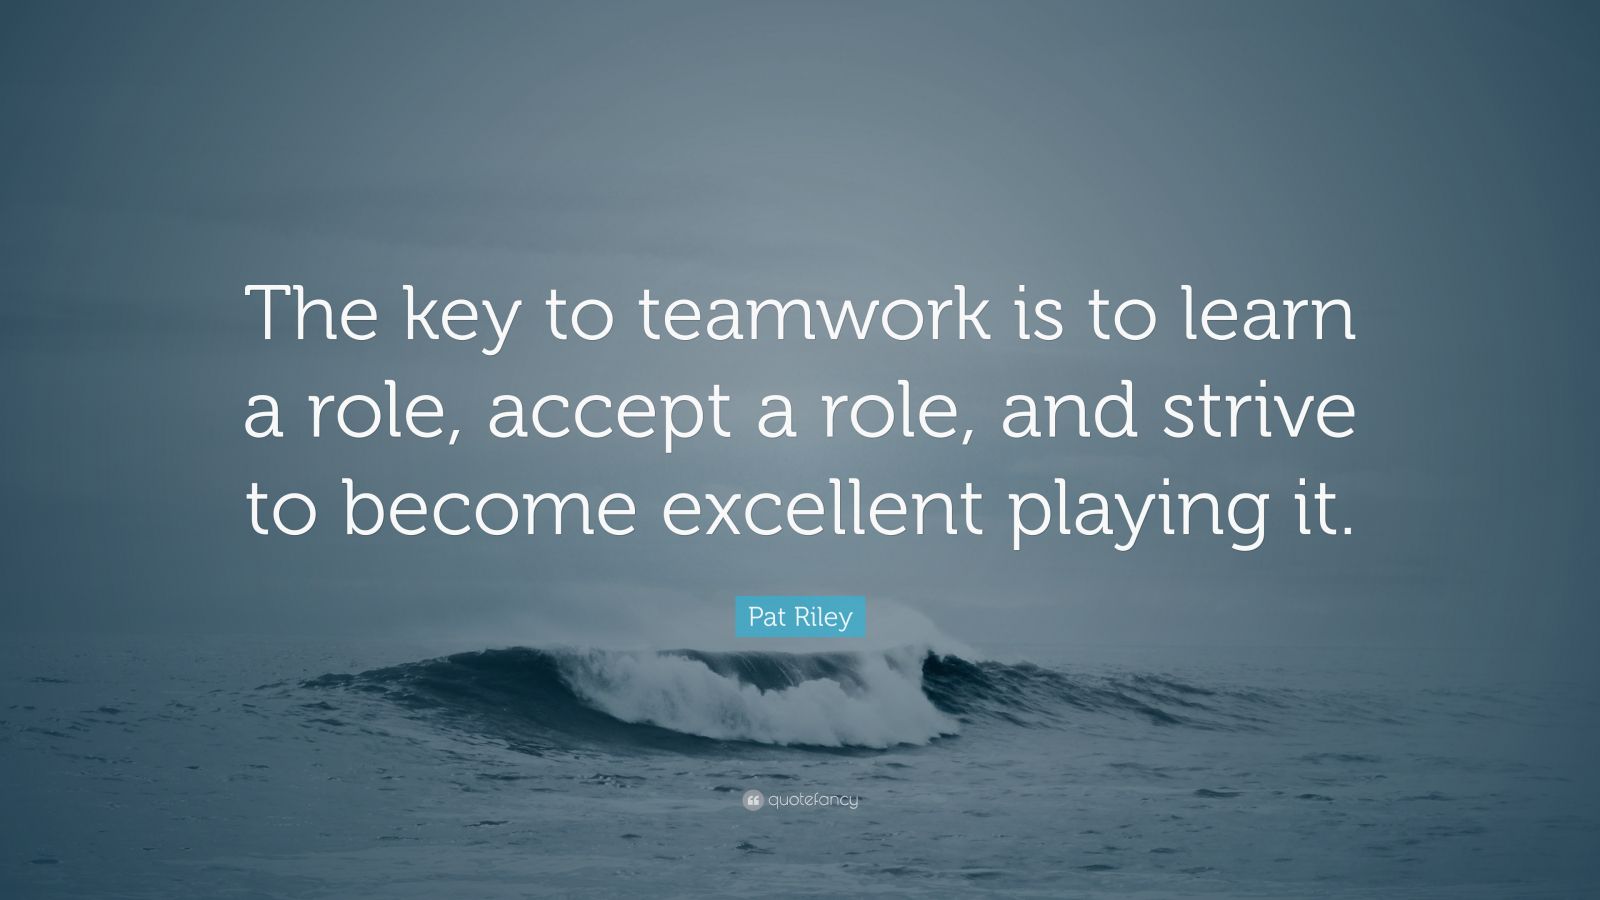 Pat Riley Quote: “The key to teamwork is to learn a role, accept a role ...